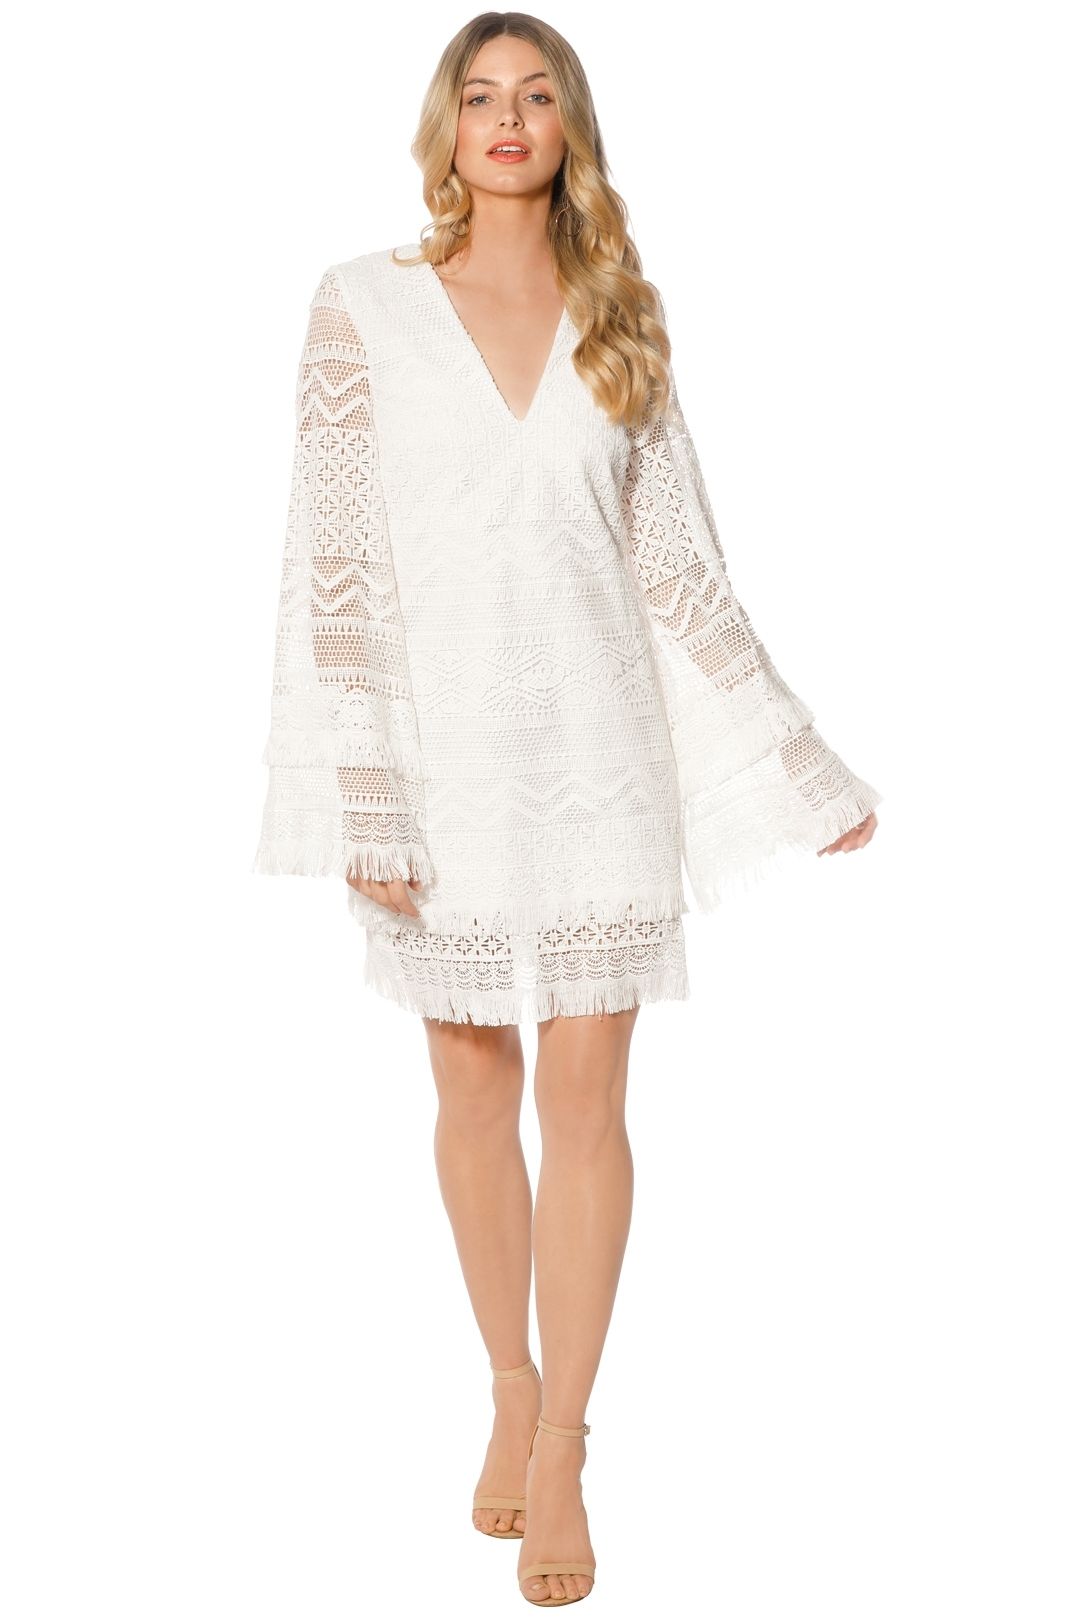 Blessed are the Meek - Ava Dress - White - Front